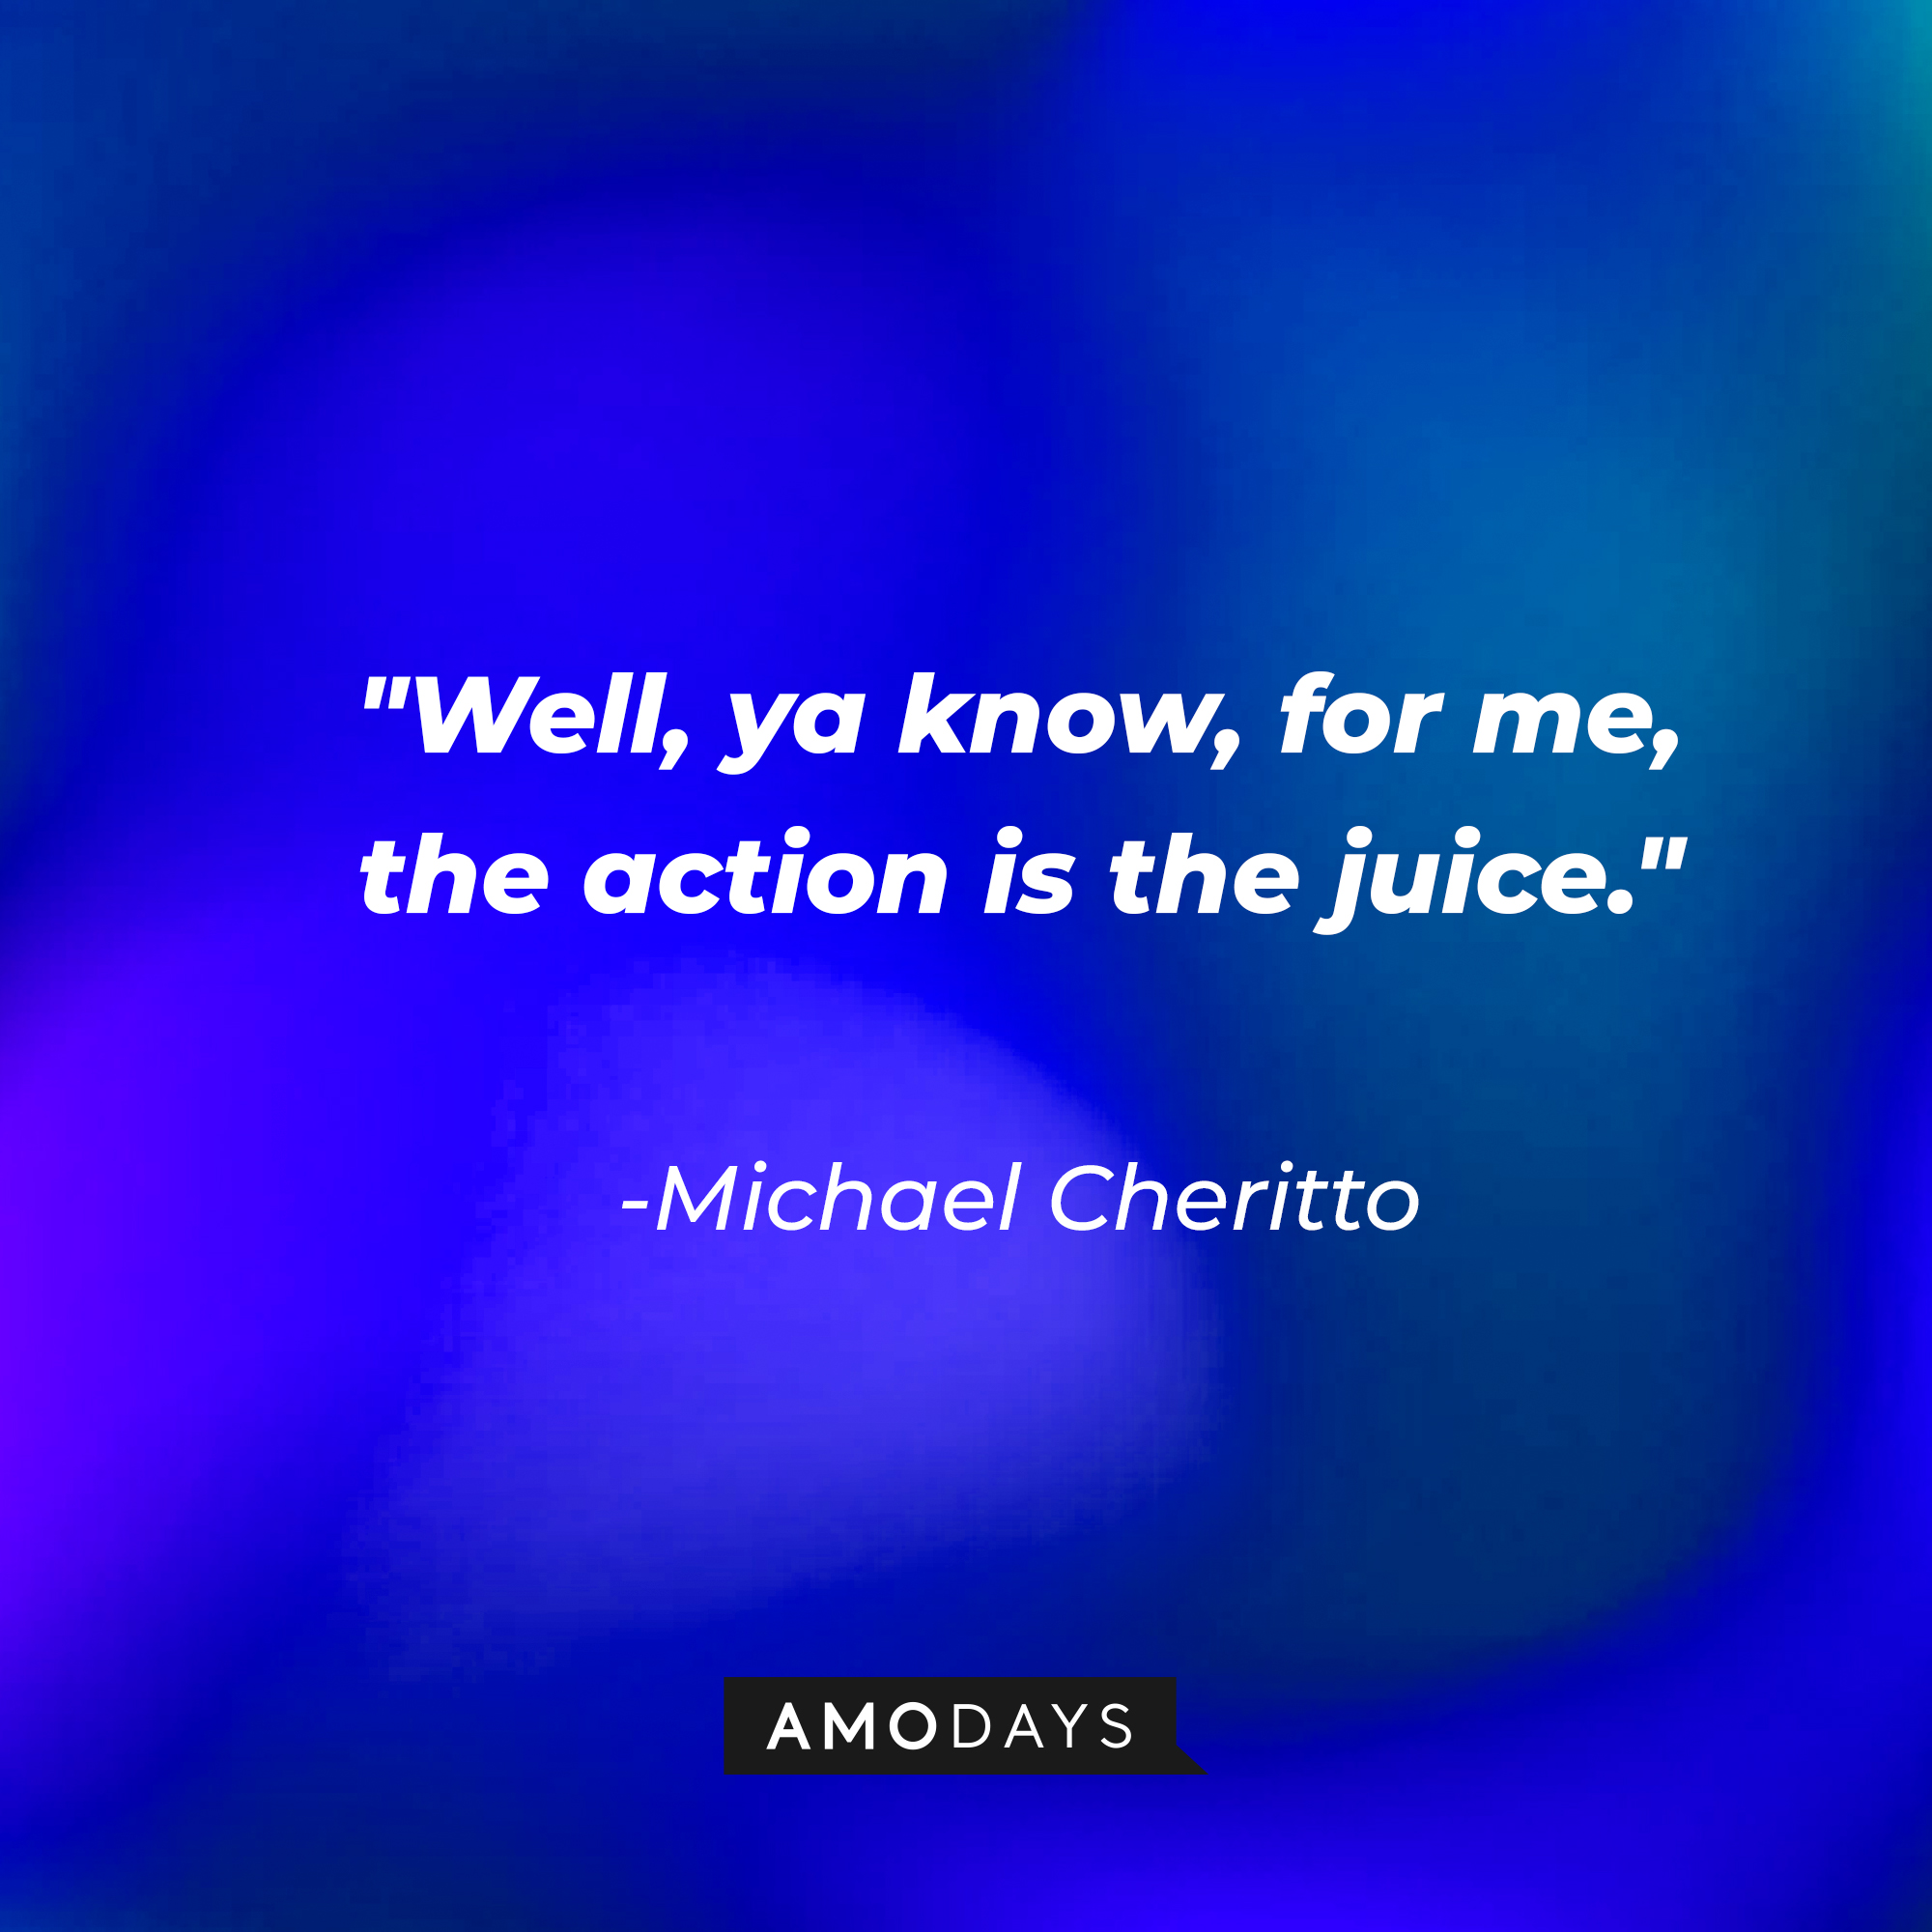 Michael Cheritto's quote: "Well, ya know, for me, the action is the juice." | Source: AmoDays